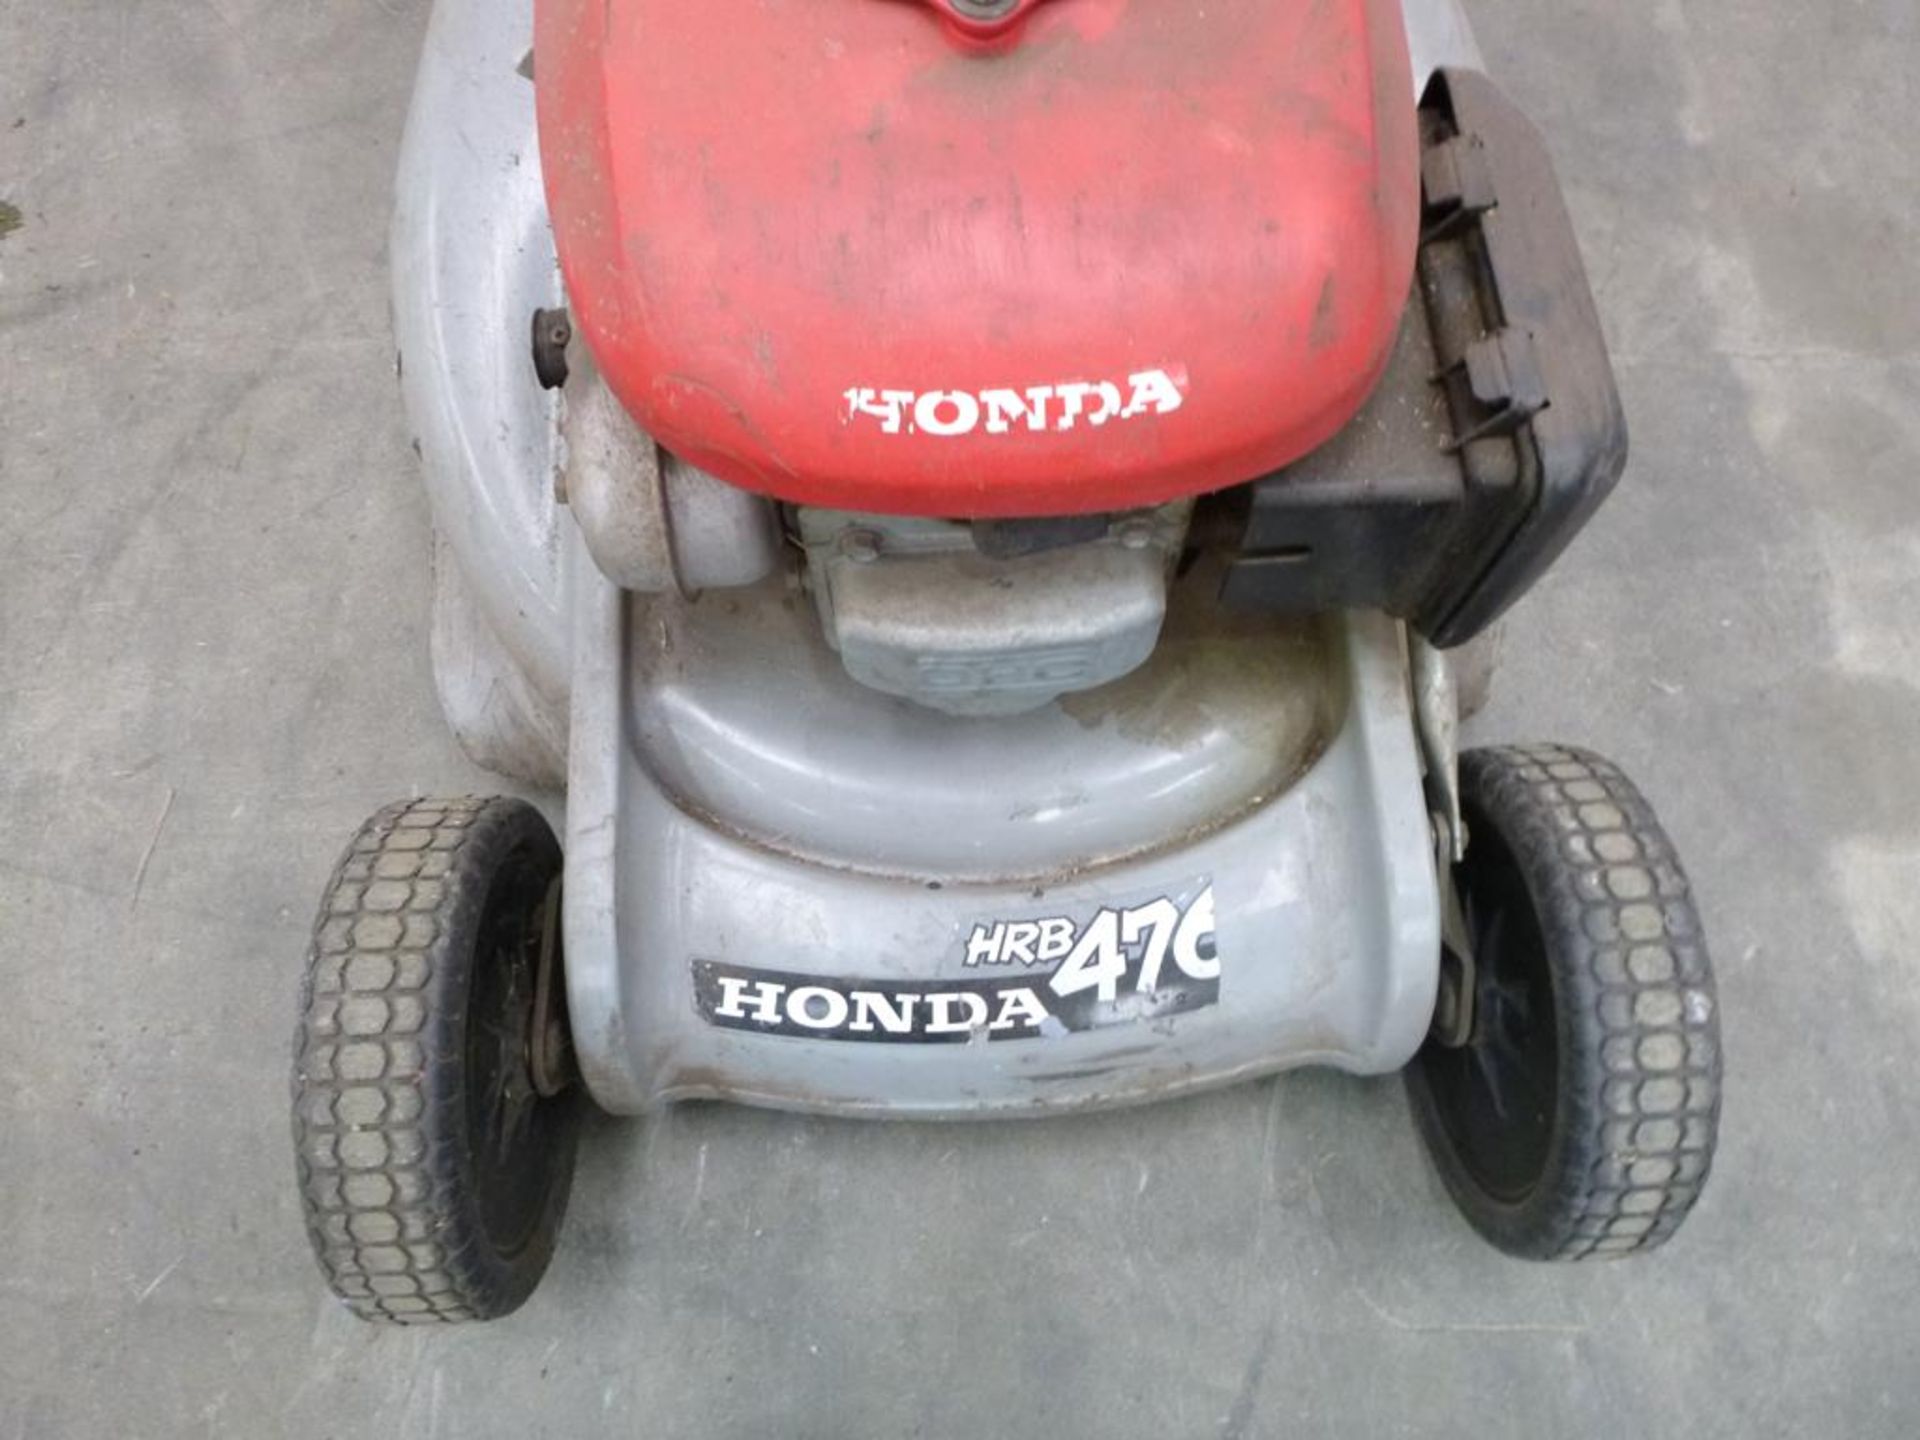 A Reconditioned Honda Powered HRB 476 Rotary Lawnmower. Shop Price £240. - Image 2 of 3